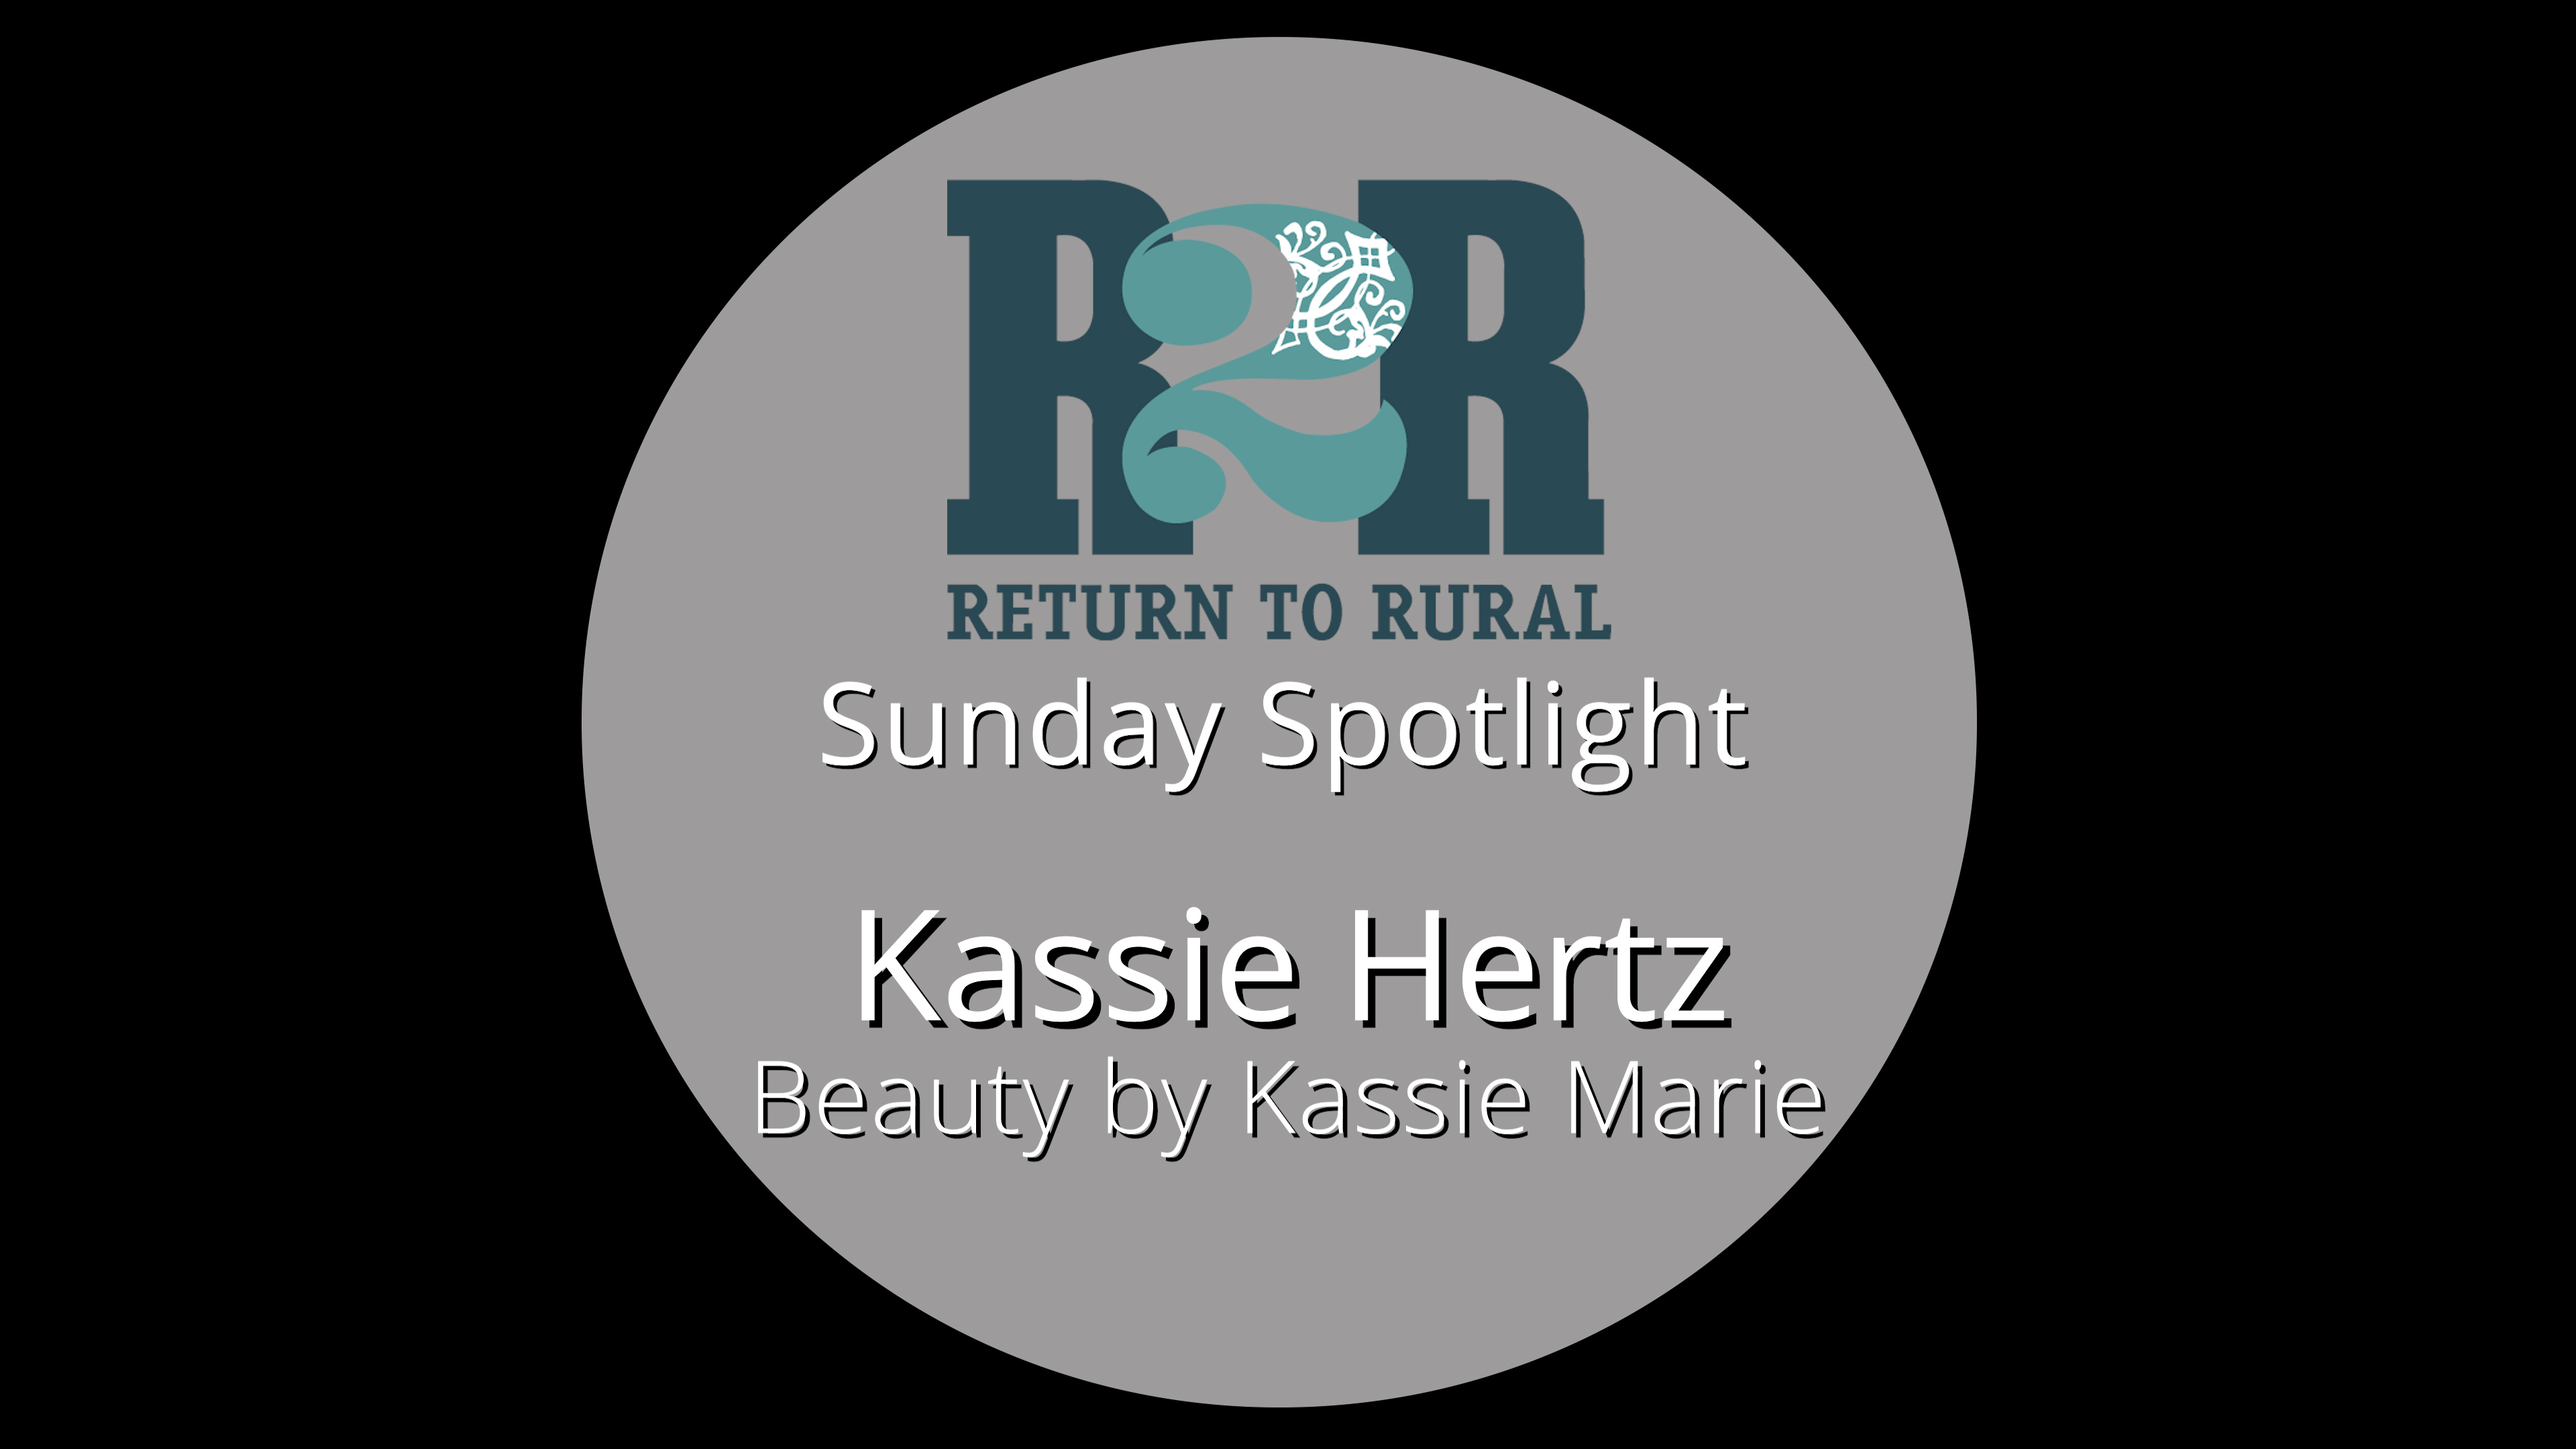 beauty by kassis marie